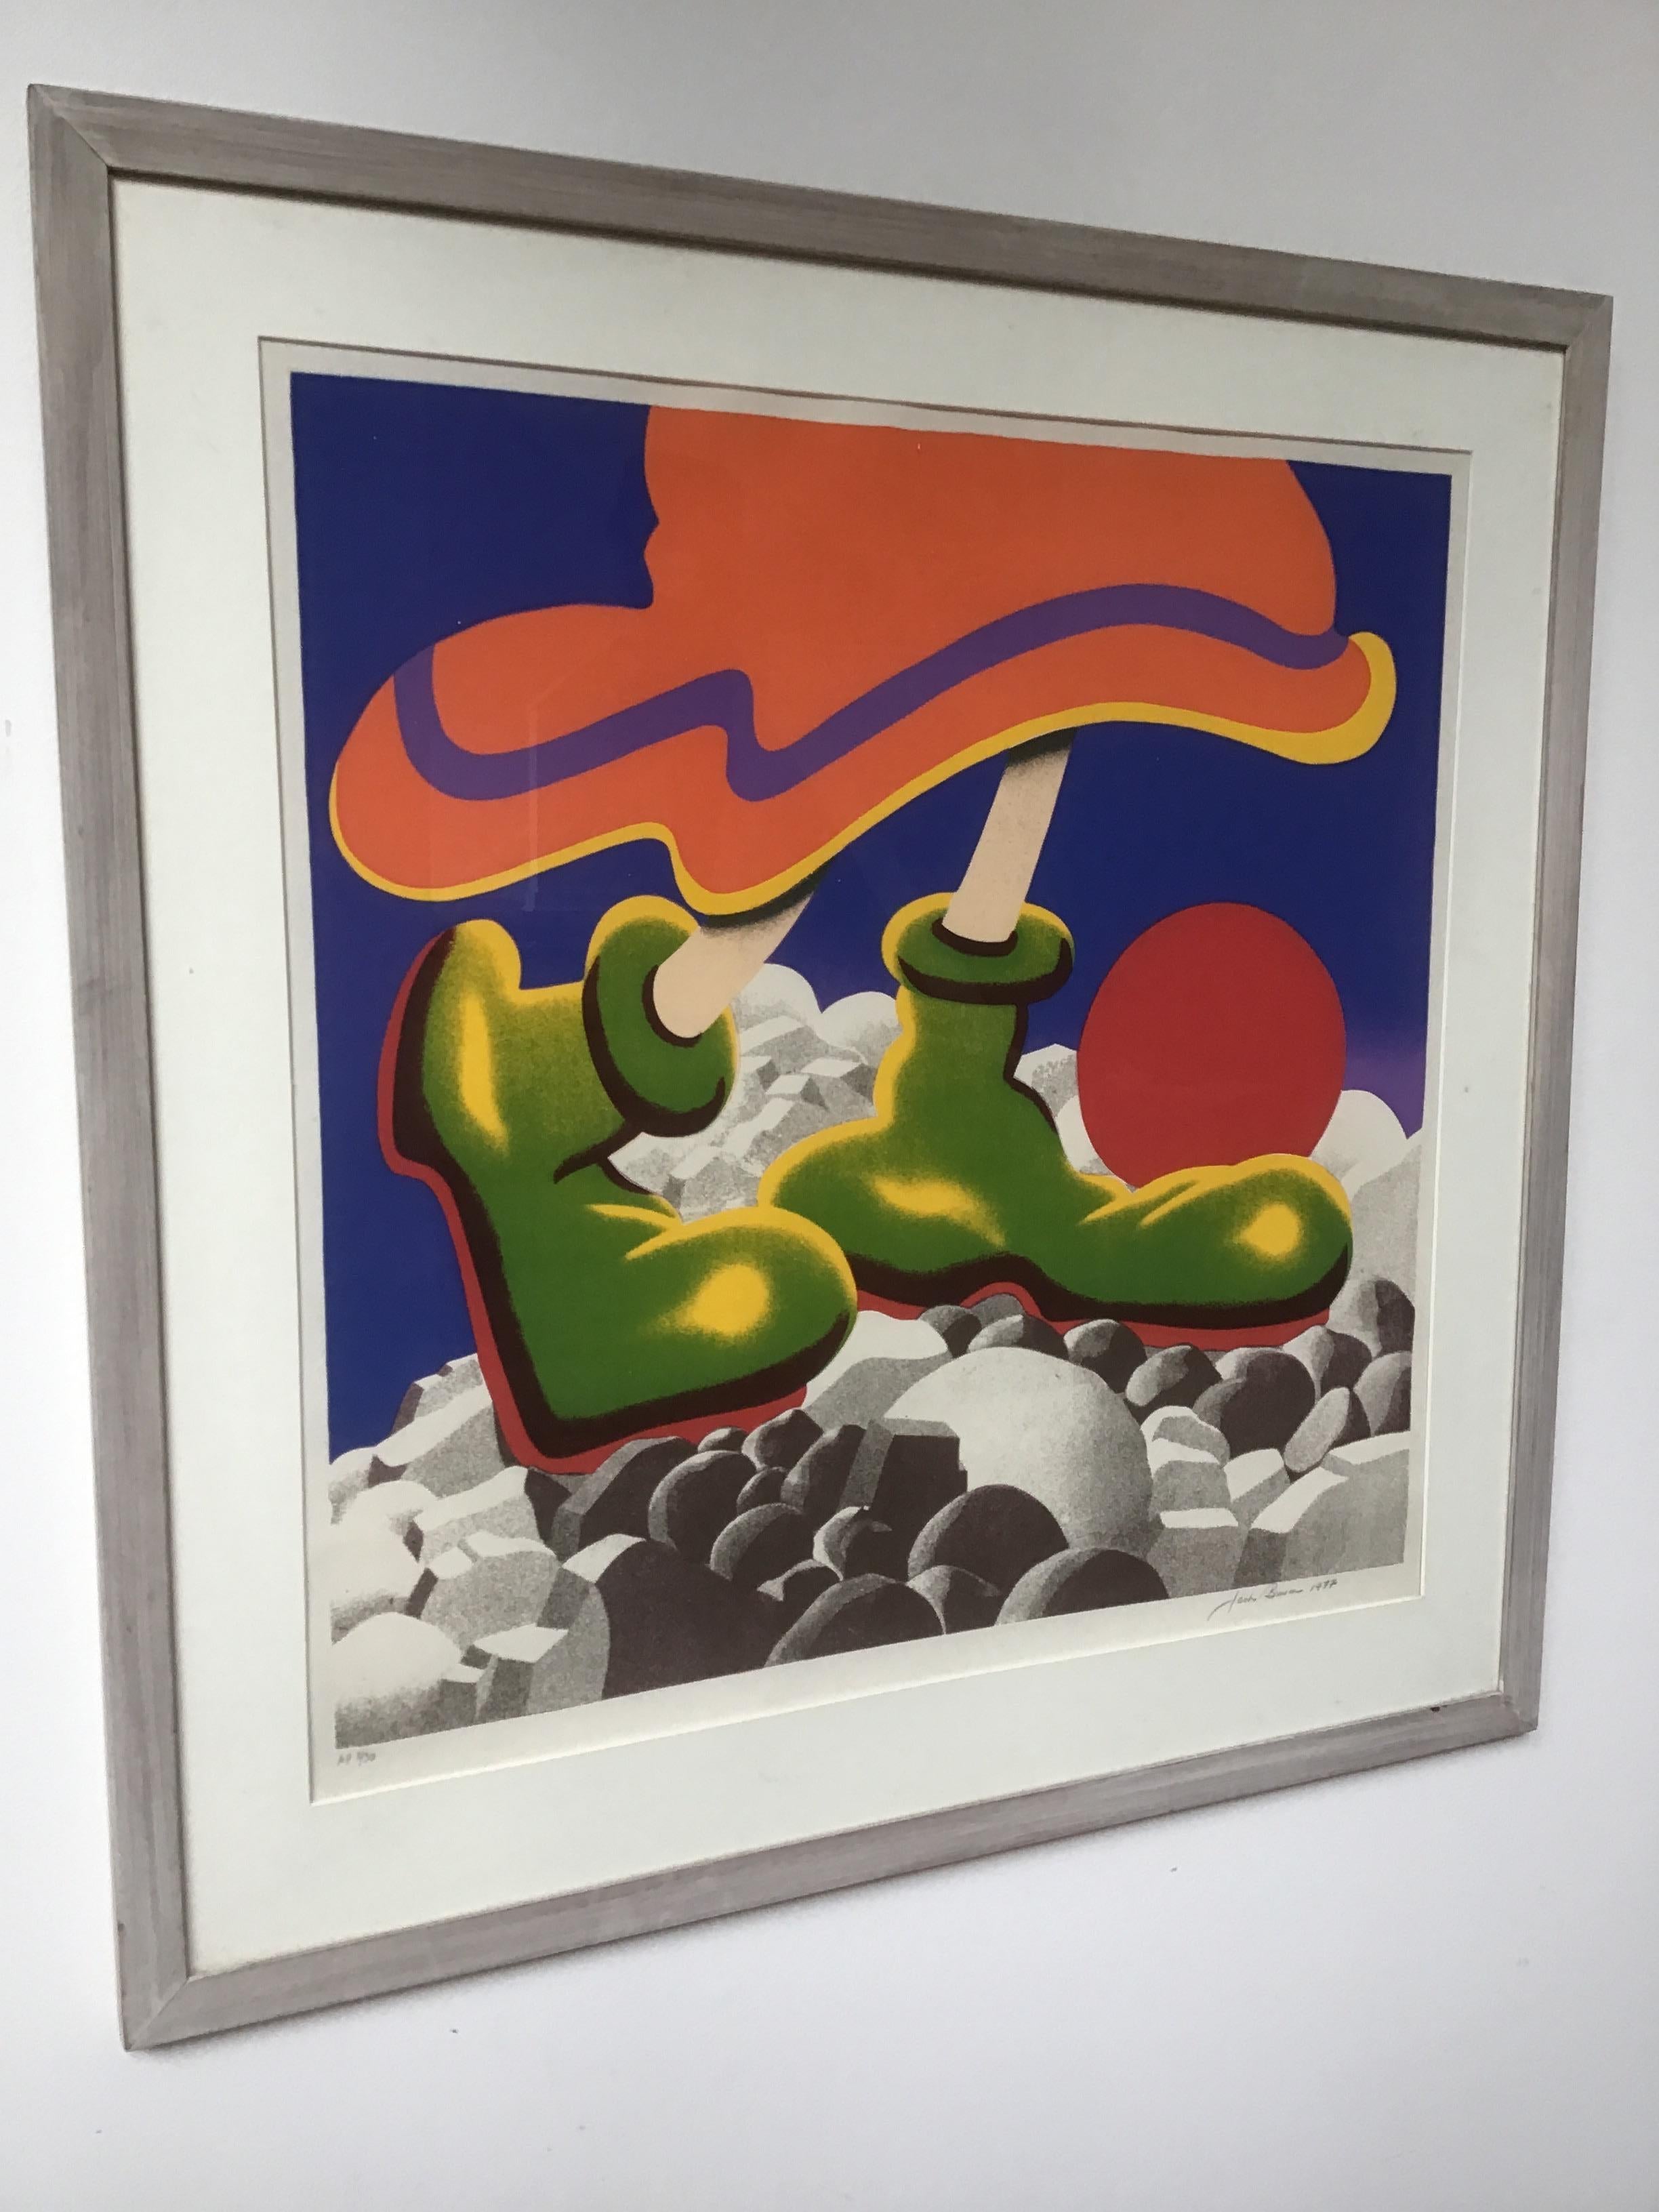 Signed olive oil serigraph. Dated 1977.